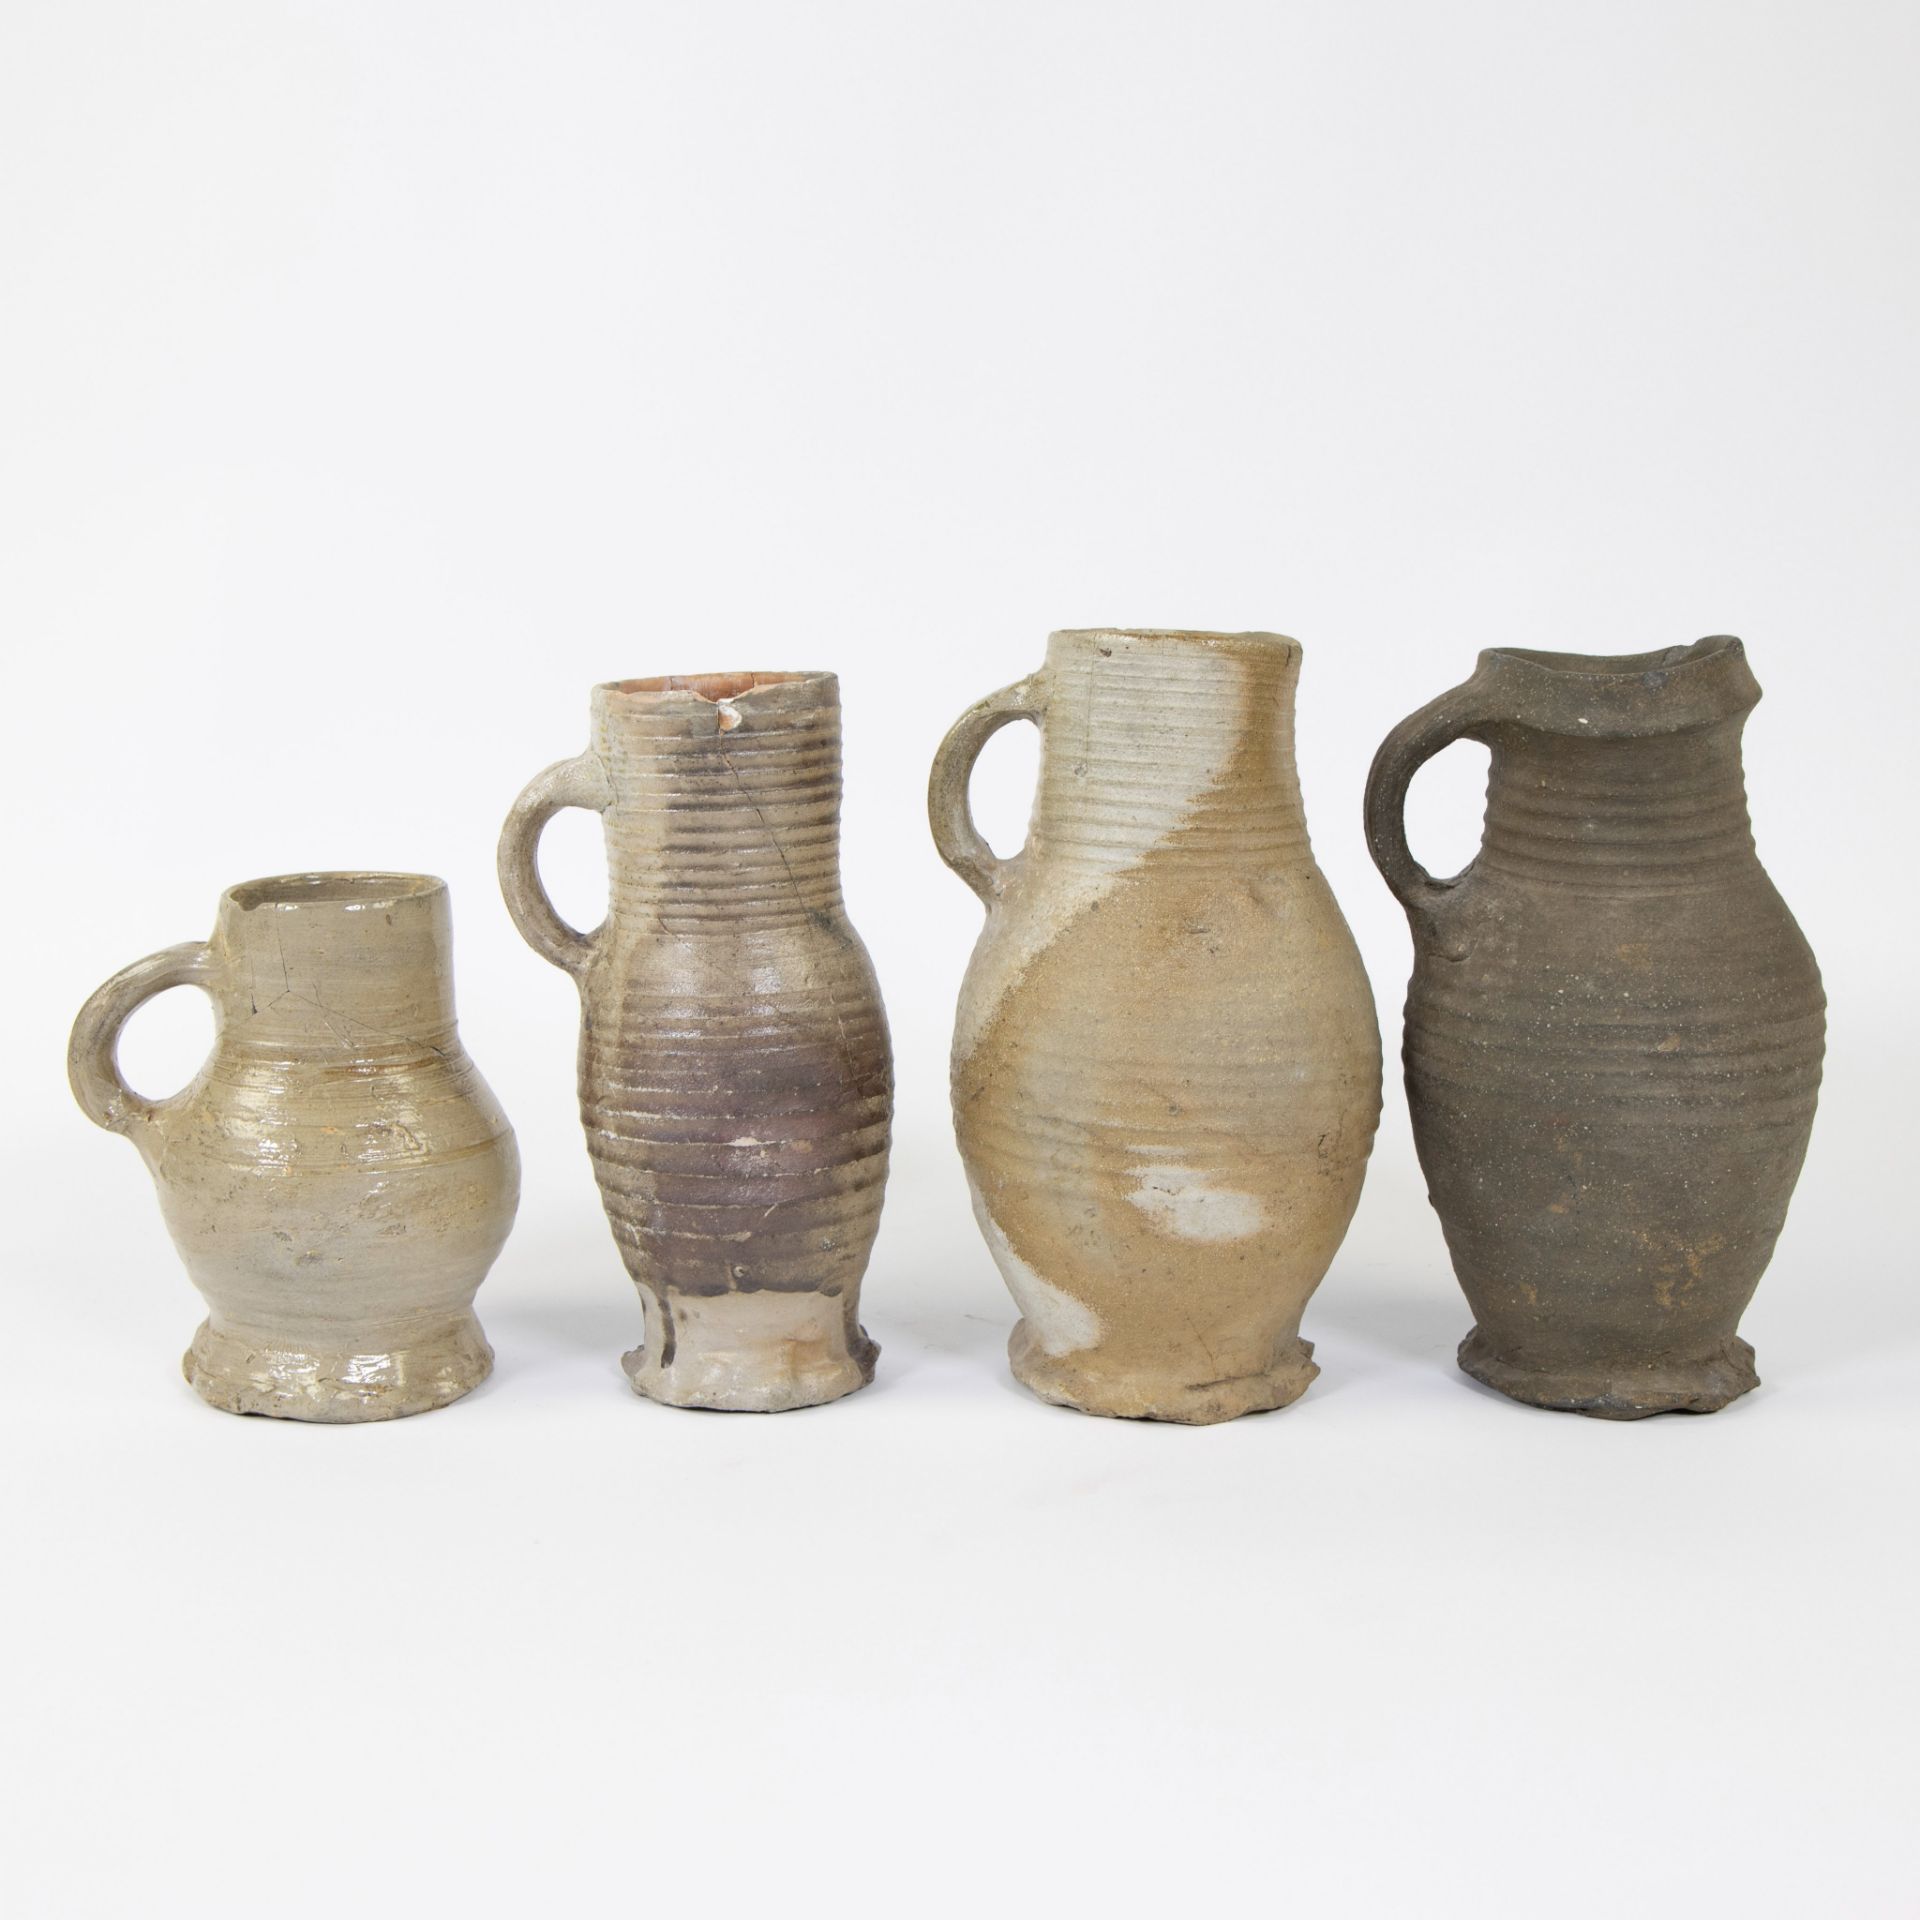 Collection of archaeological stoneware, jug Langerwald 15th, Siegburg 13th and 14th and Raeren 16th - Image 3 of 5